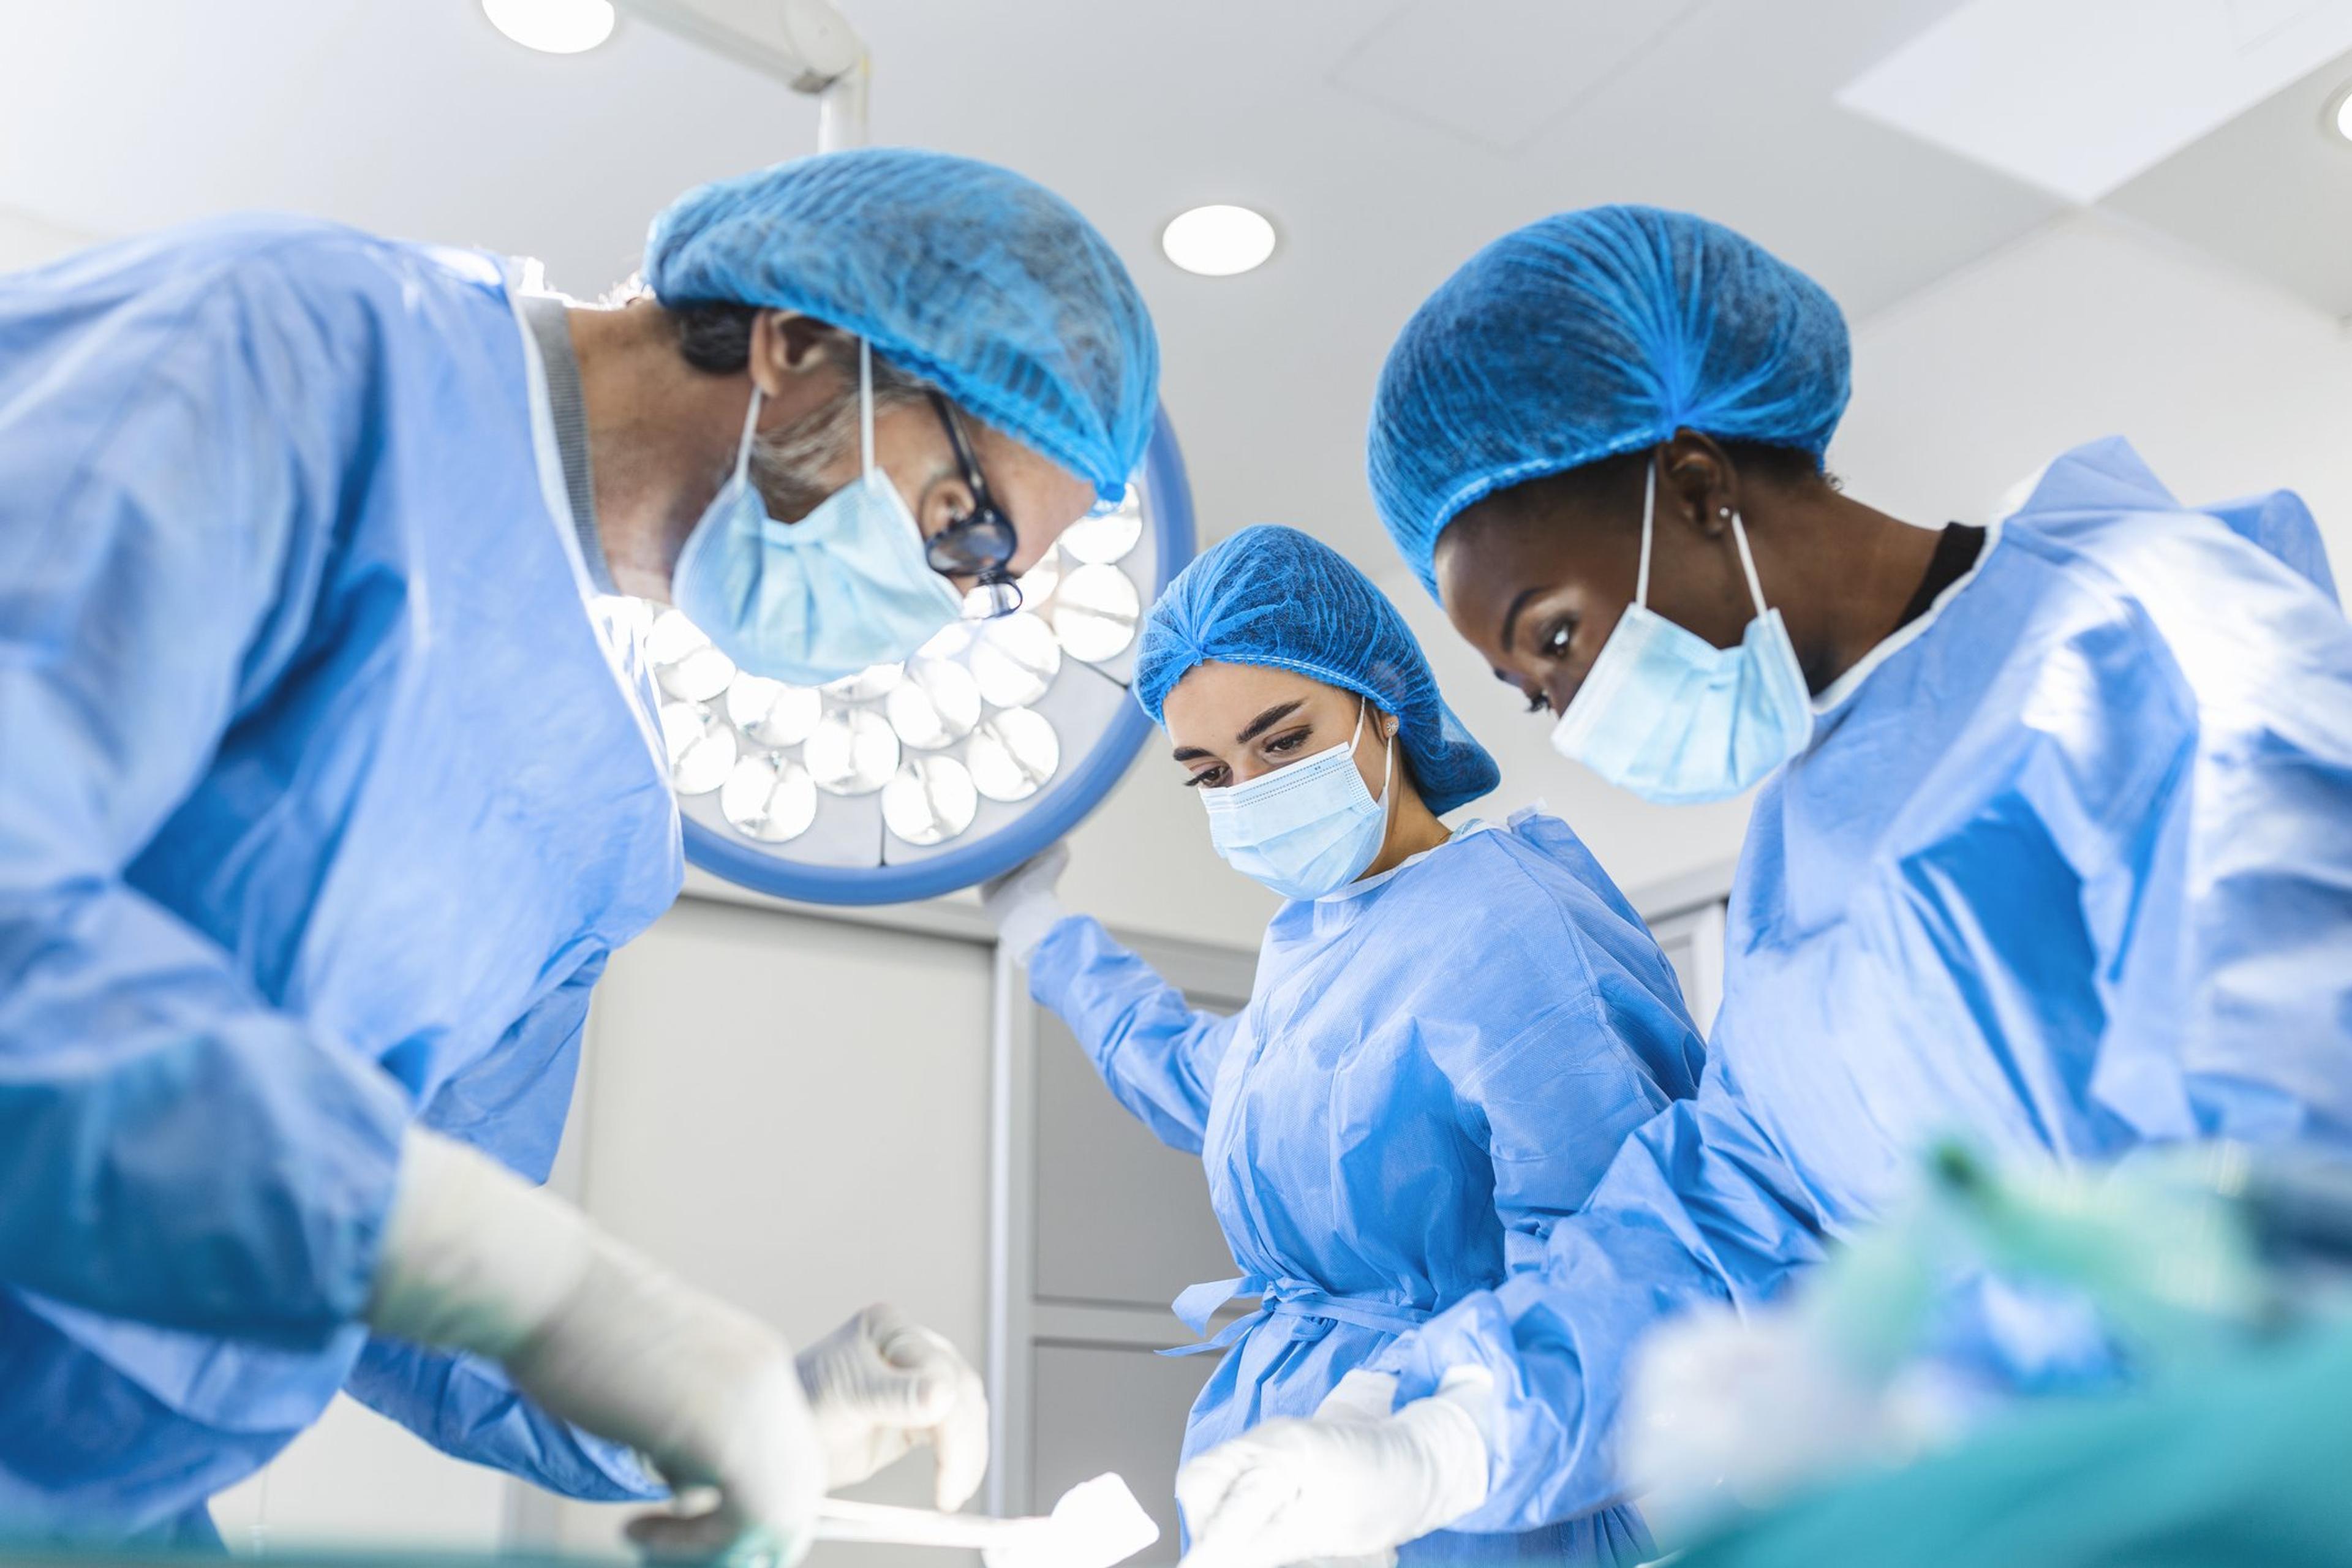 Surgeons wearing protective equipment prepare for a surgery